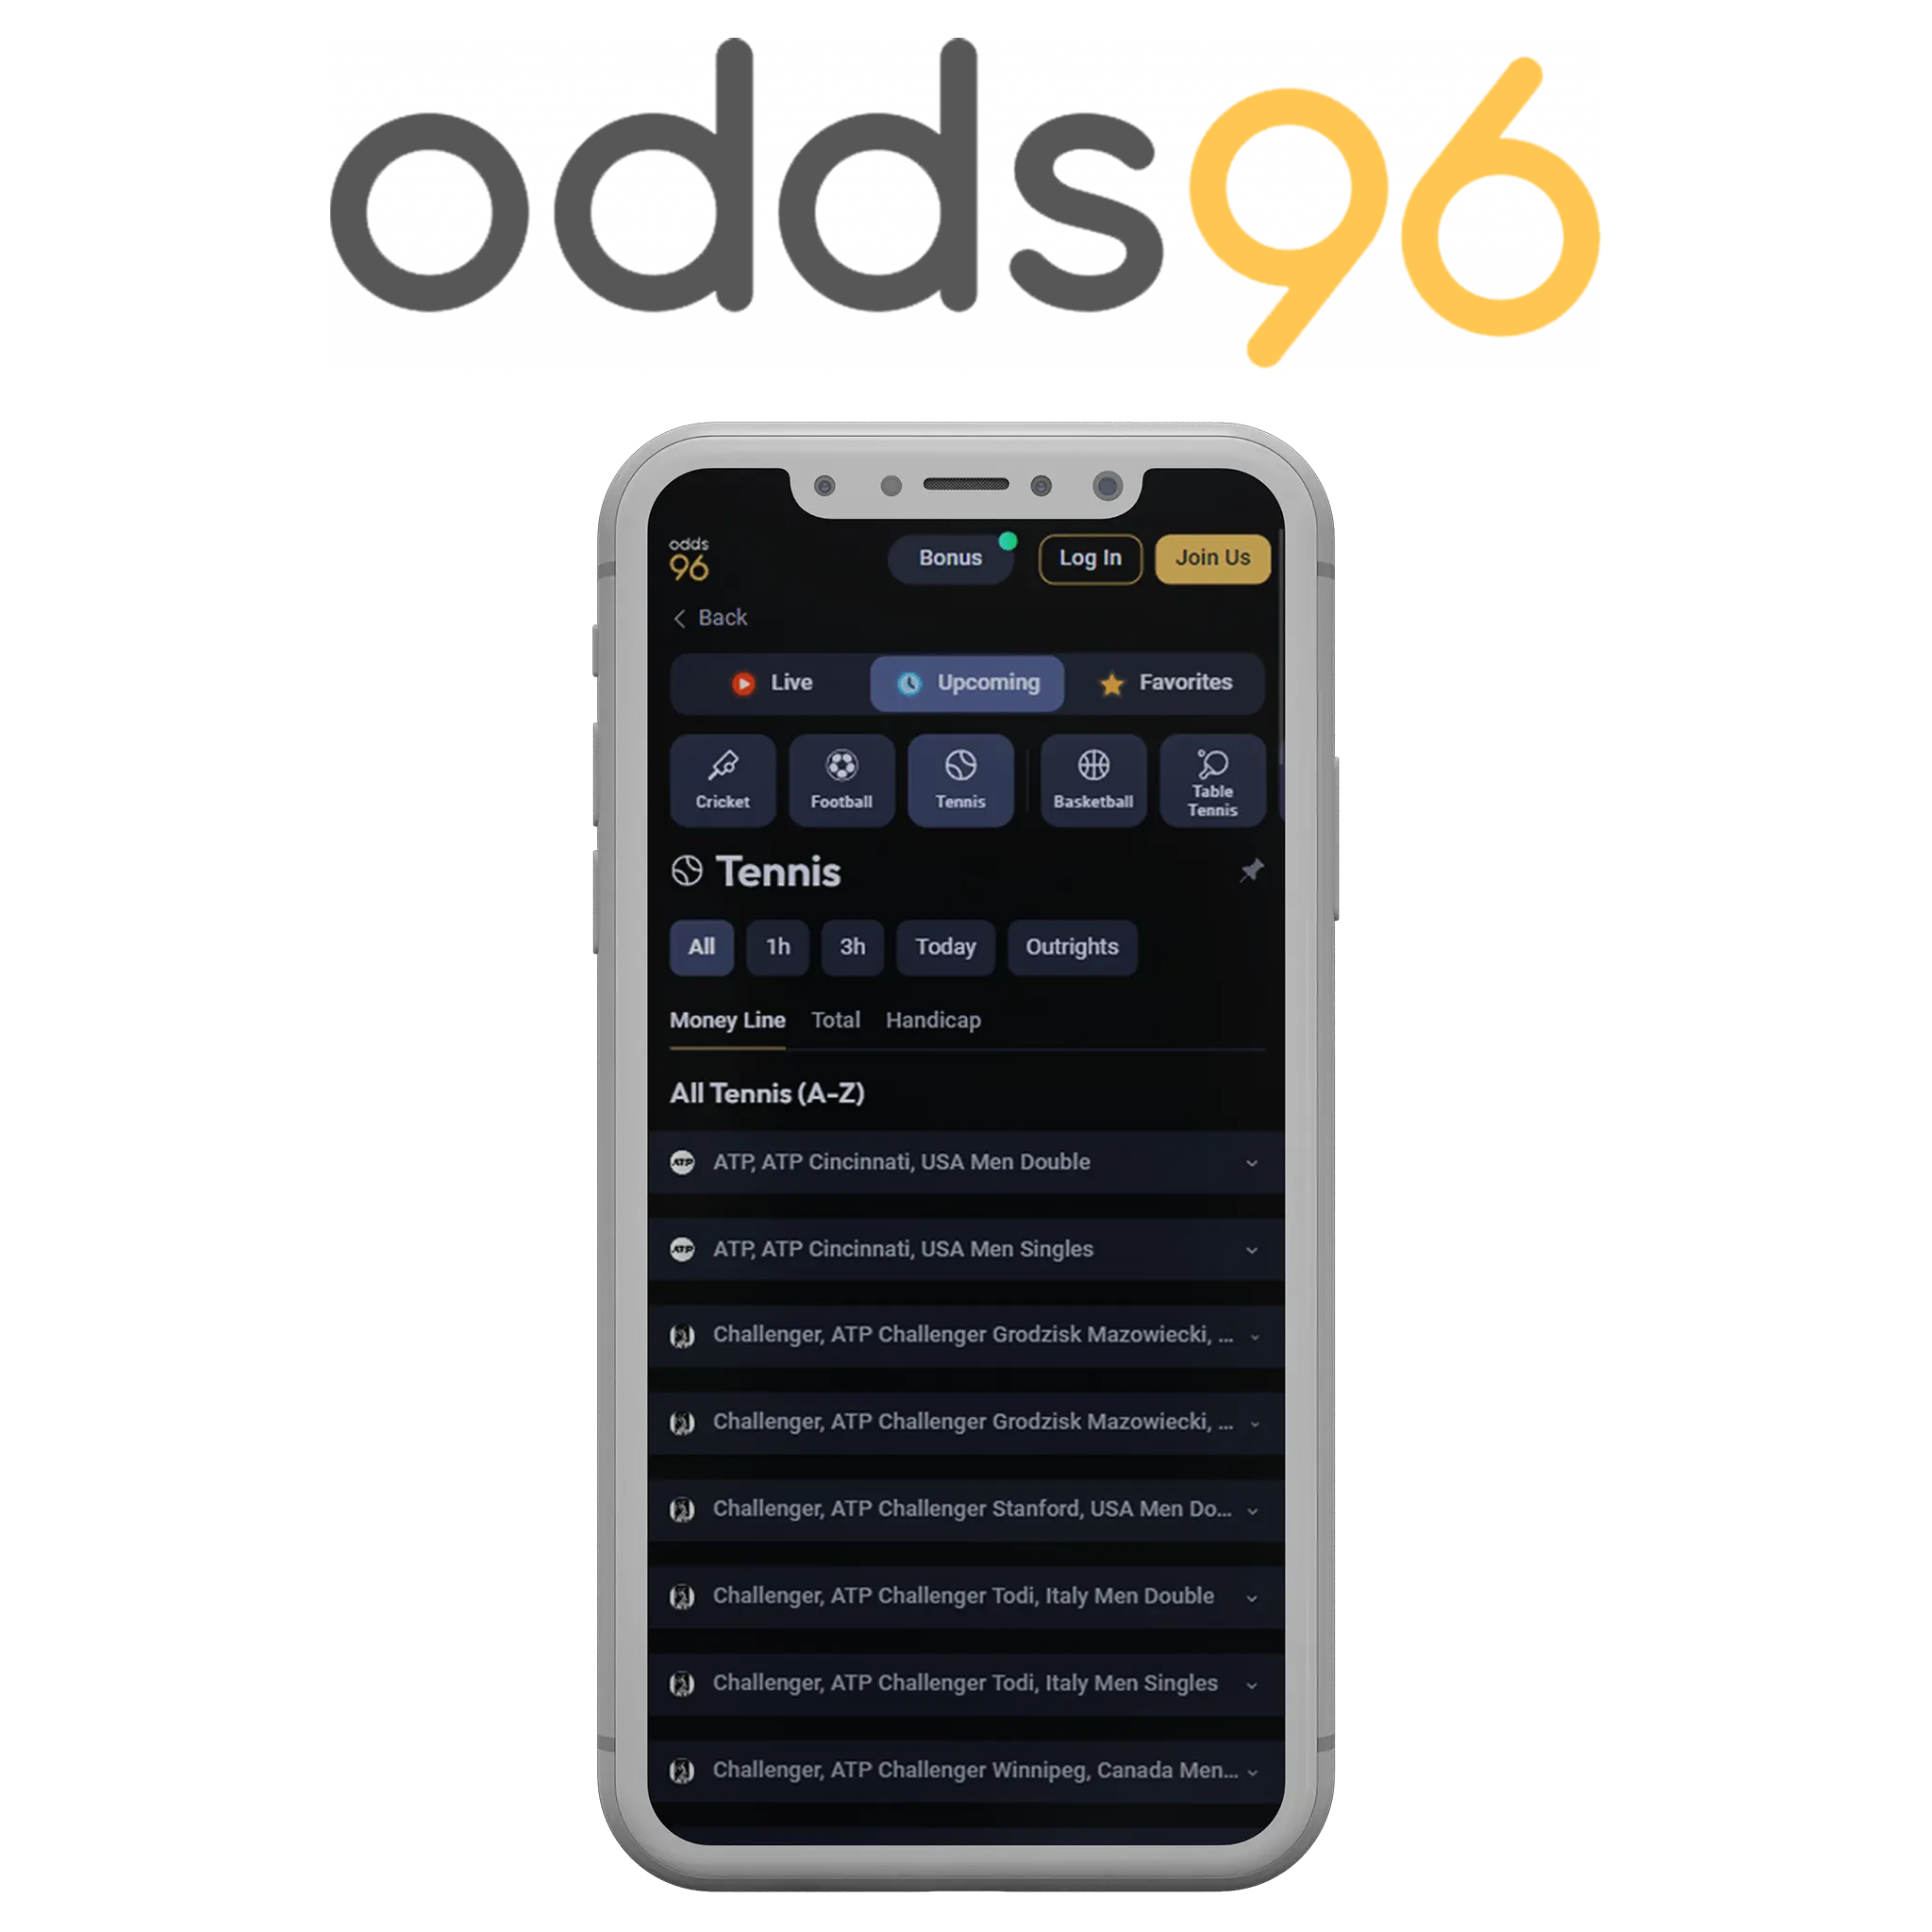 Odds96 mobile app is very convenient to place bets on tennis.